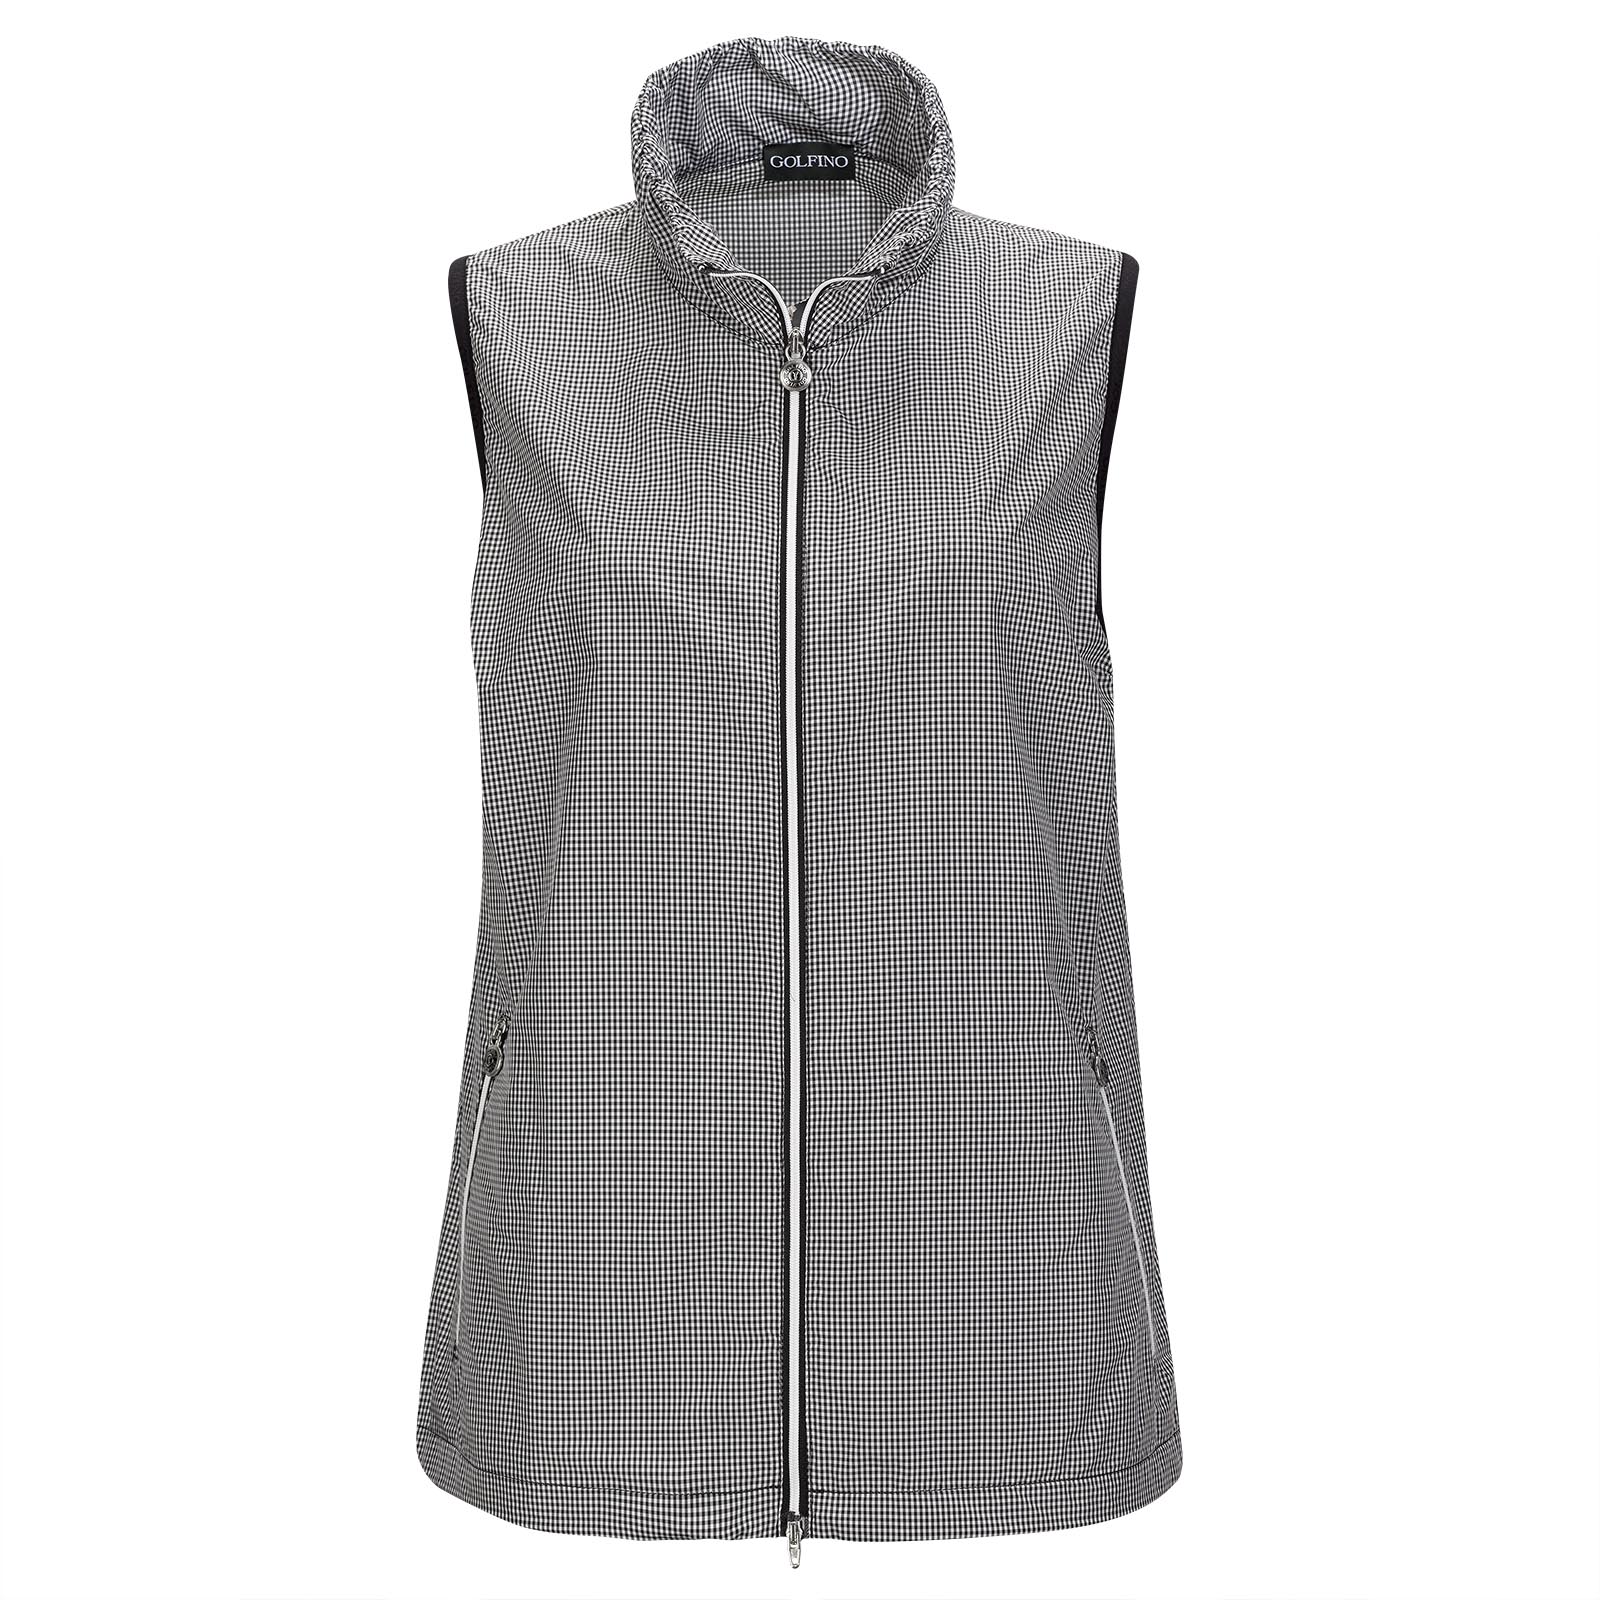 Wind Protection Ladies' golf gilet with stylish Vichy pattern